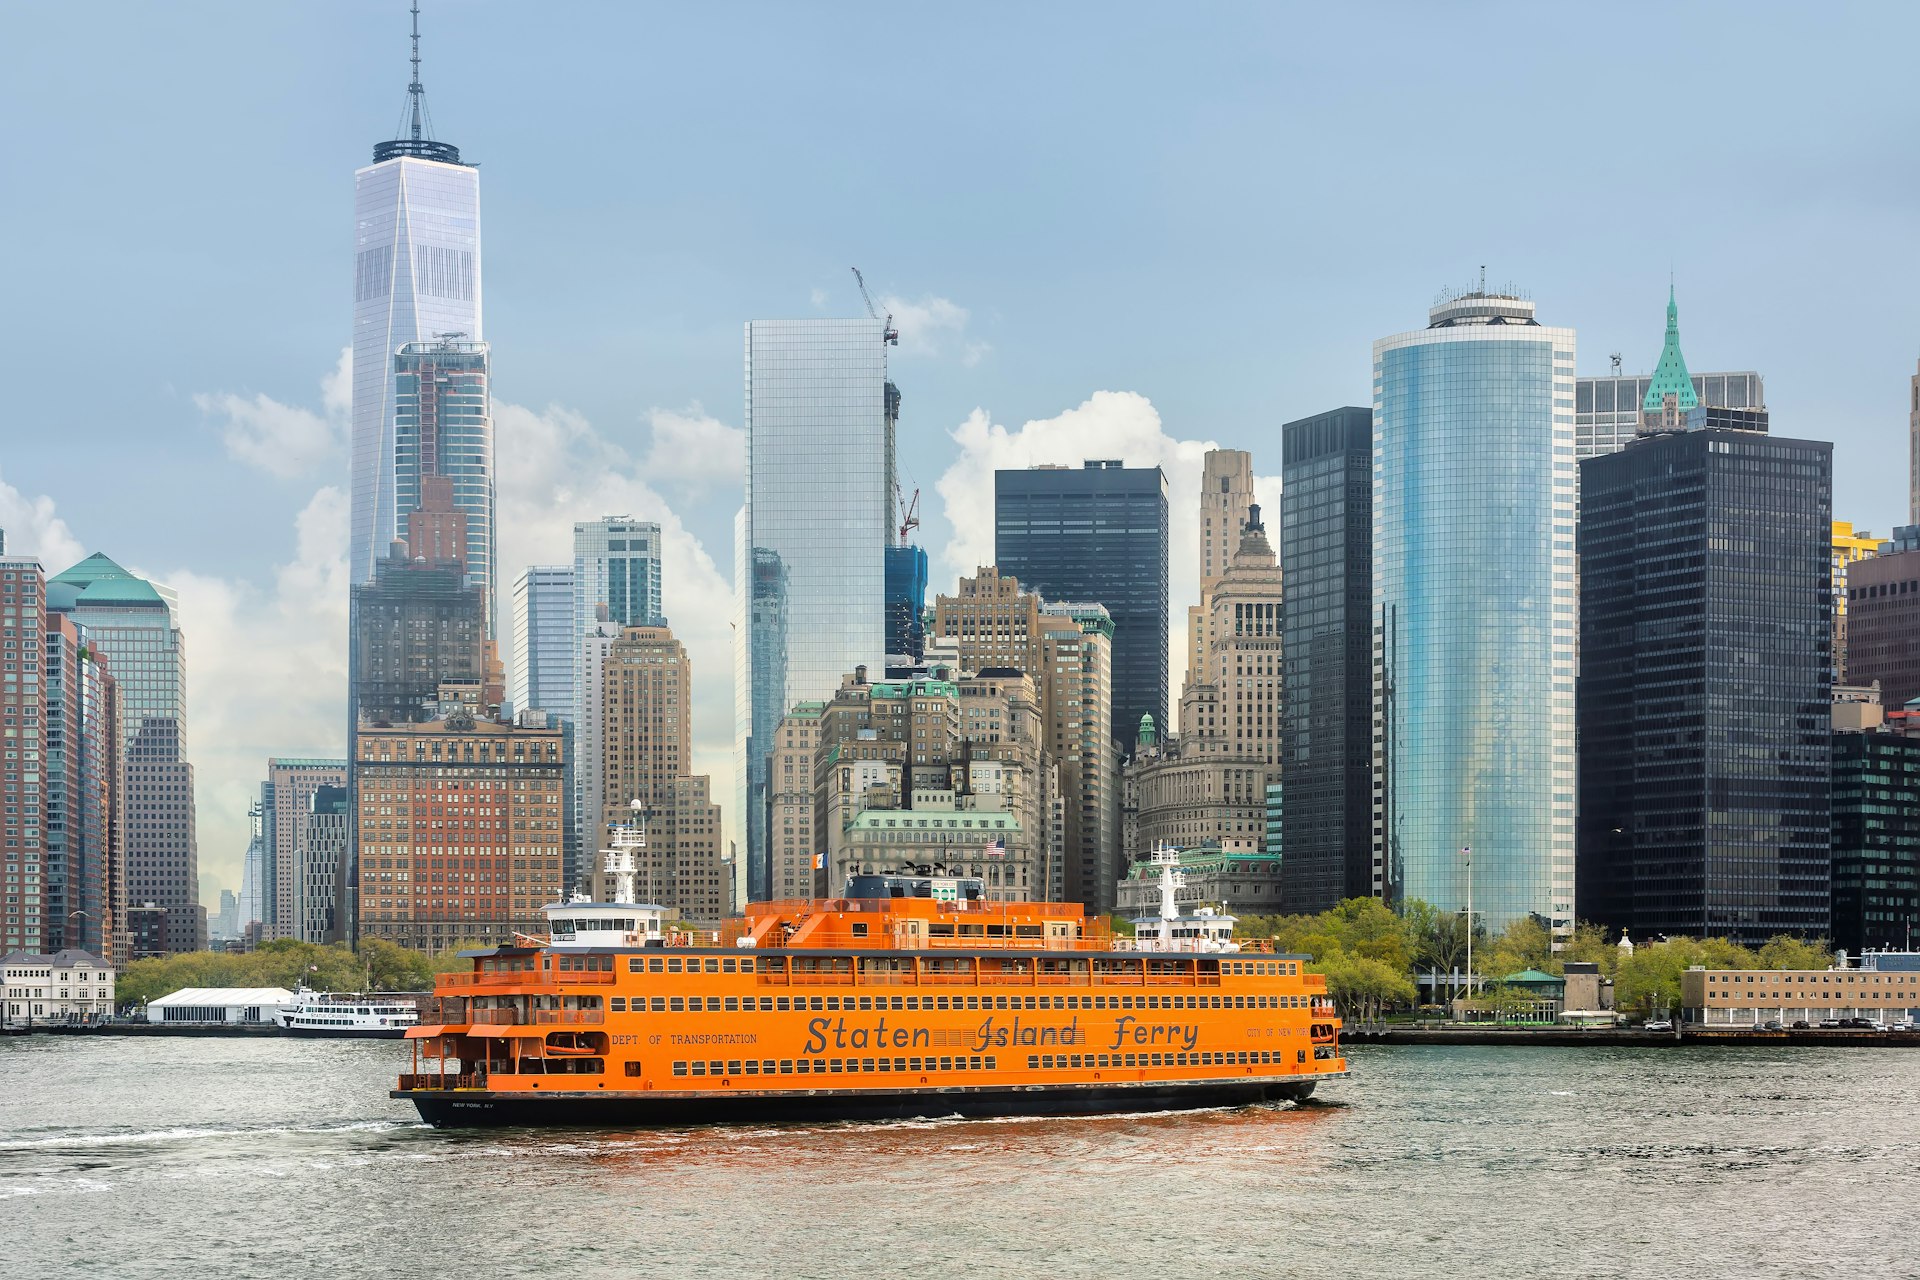 An orange boat of the Staten Island Ferry in New York Harbor against Lower Manhattan skyscrapers, New York City, New York, USA